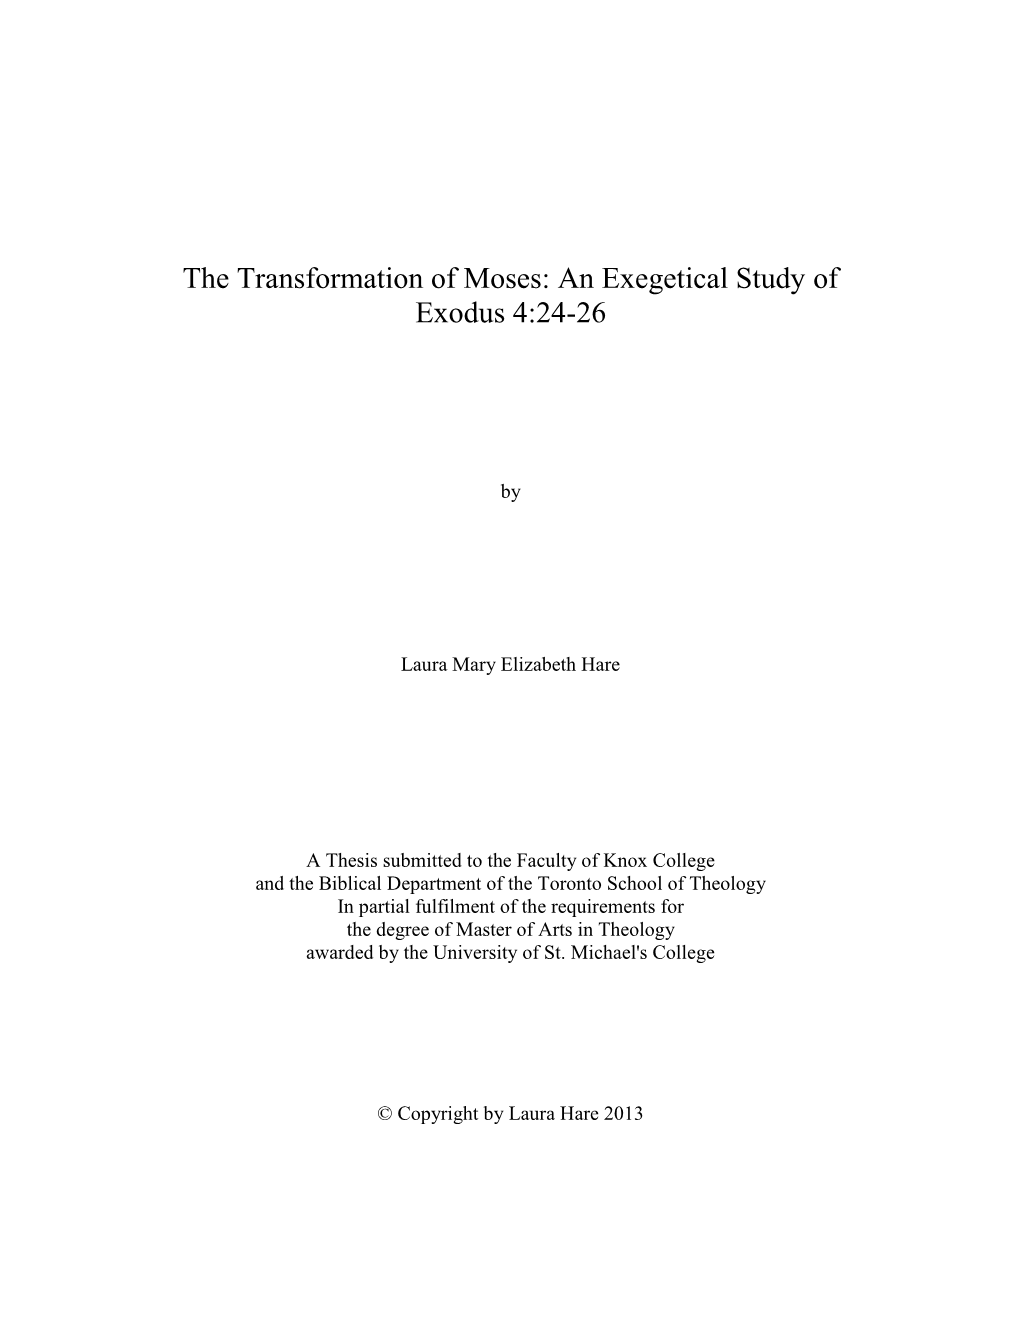 The Transformation of Moses: an Exegetical Study of Exodus 4:24-26